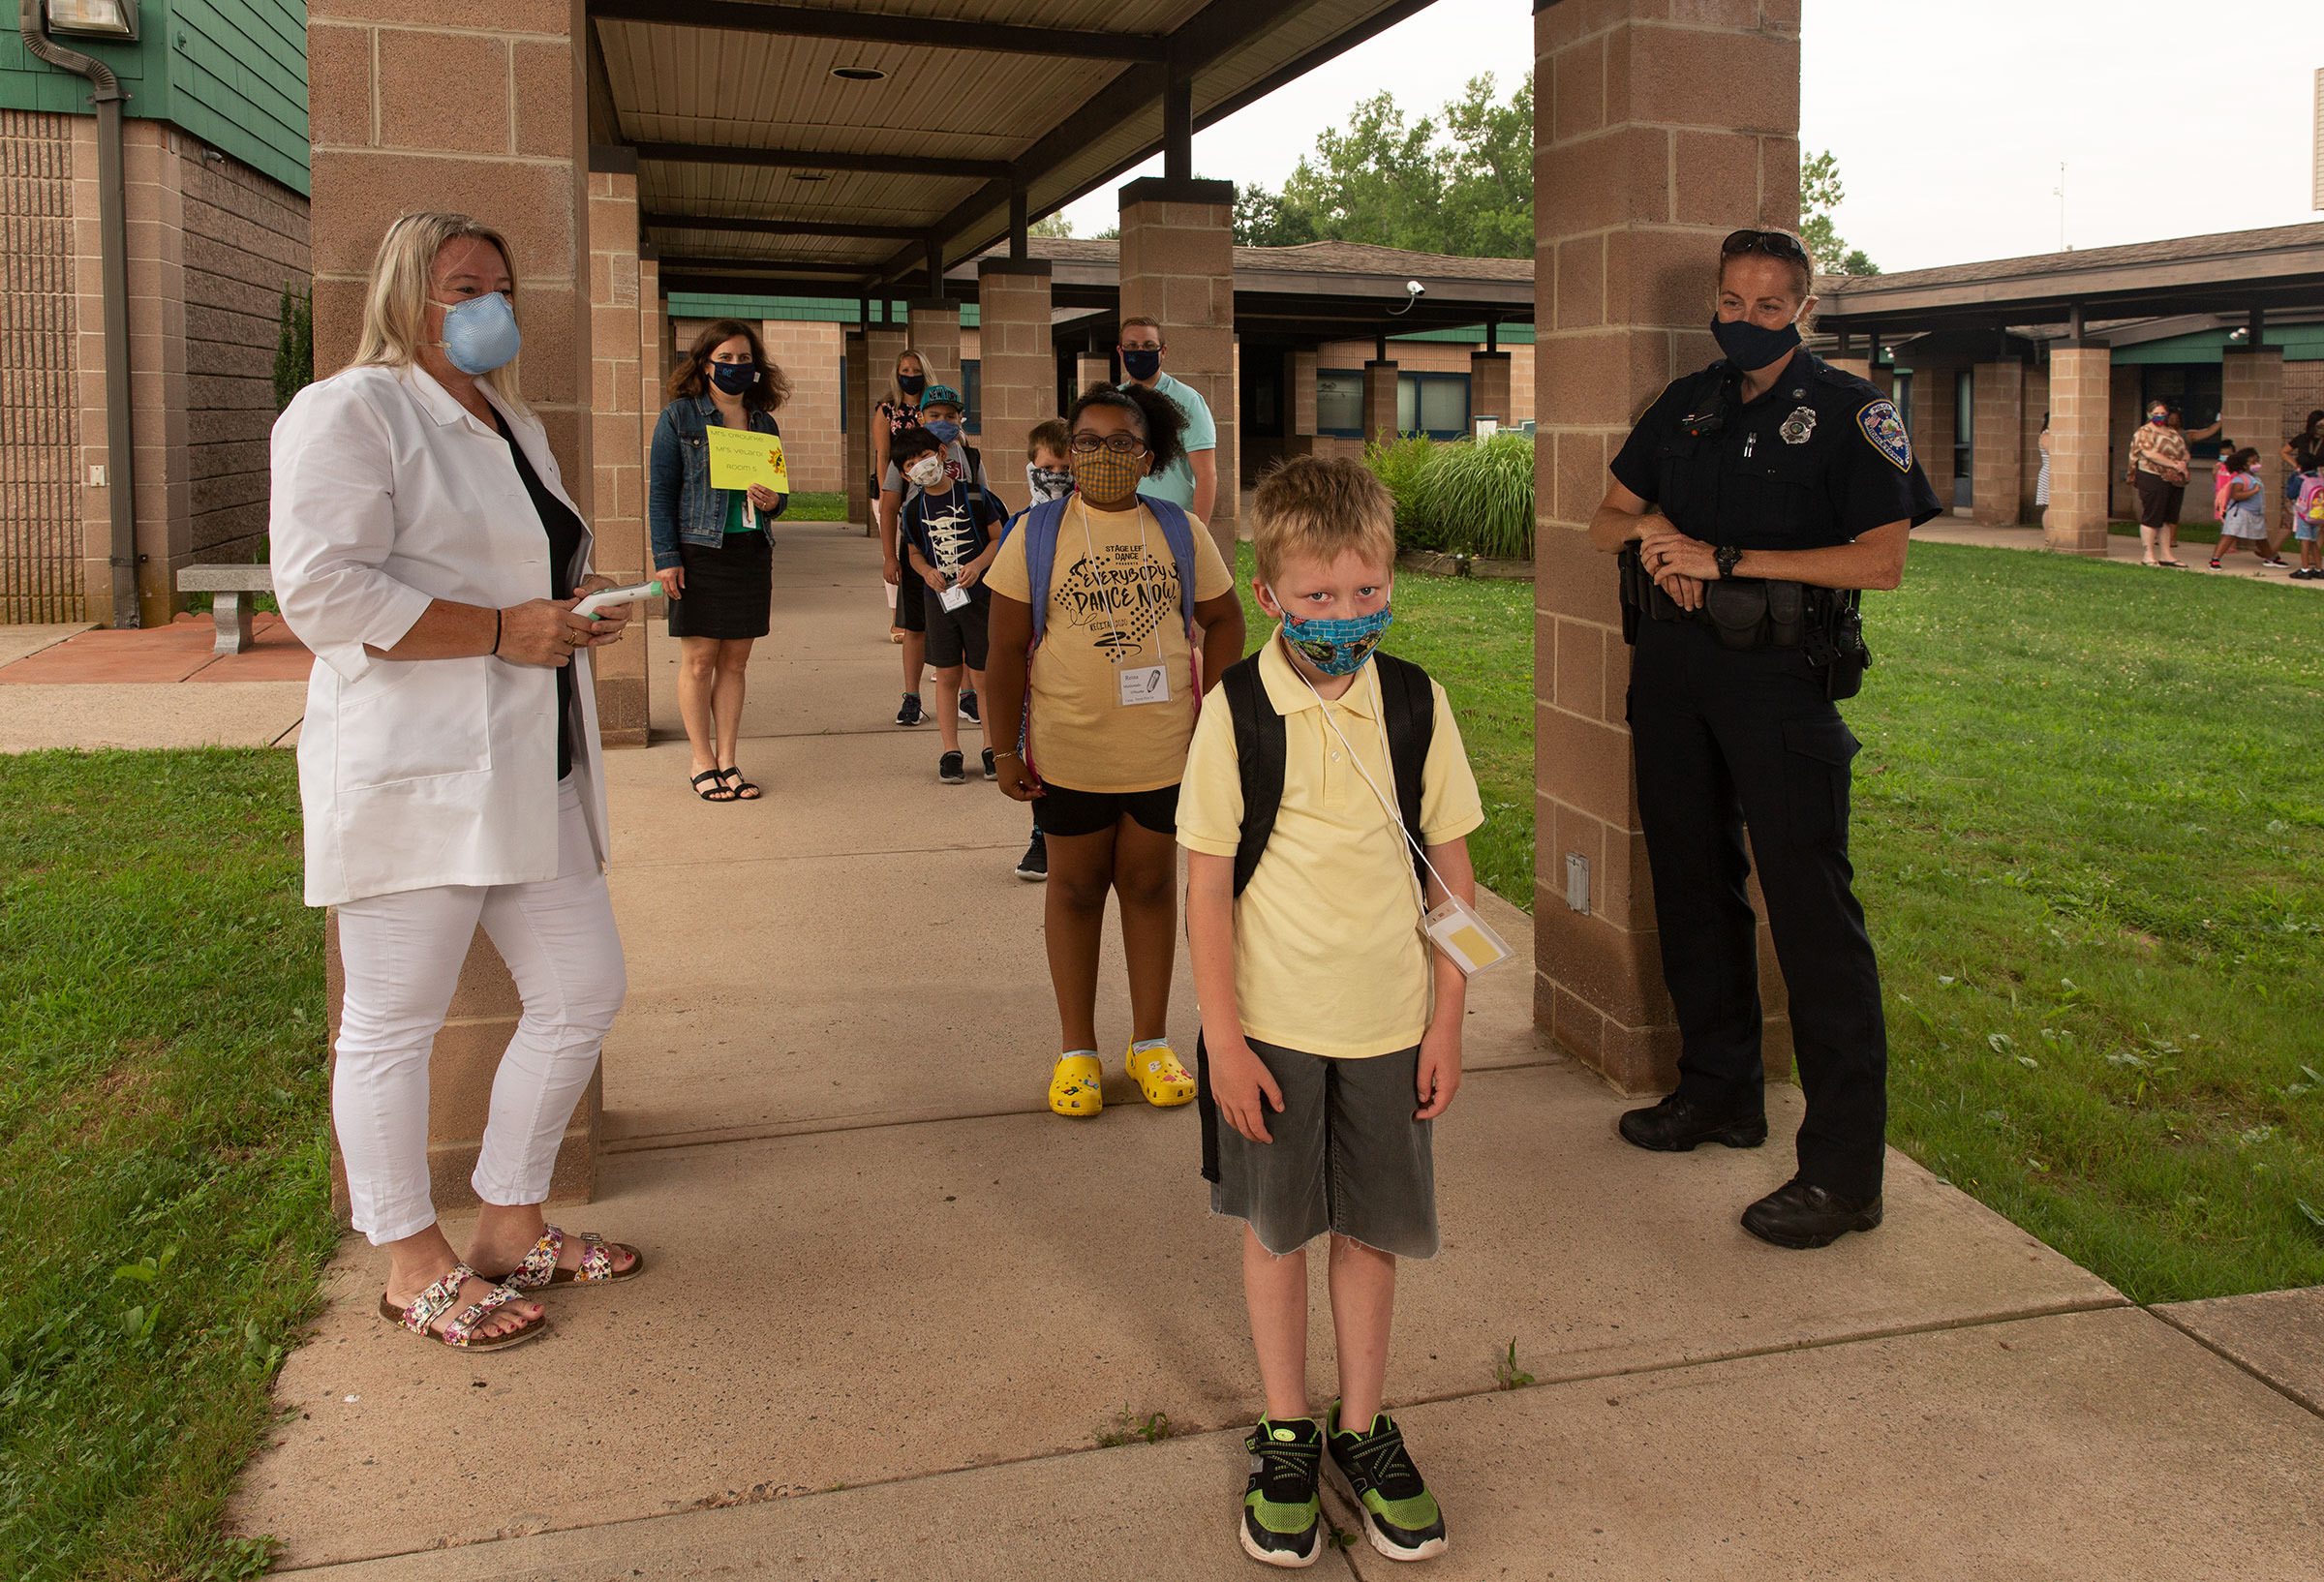 Nurse Sarah Ladd and school resource officer Kristen Tyrseck ensure kids keep a safe distance apart as they enter Wesley Elementary School in Middletown, Conn.